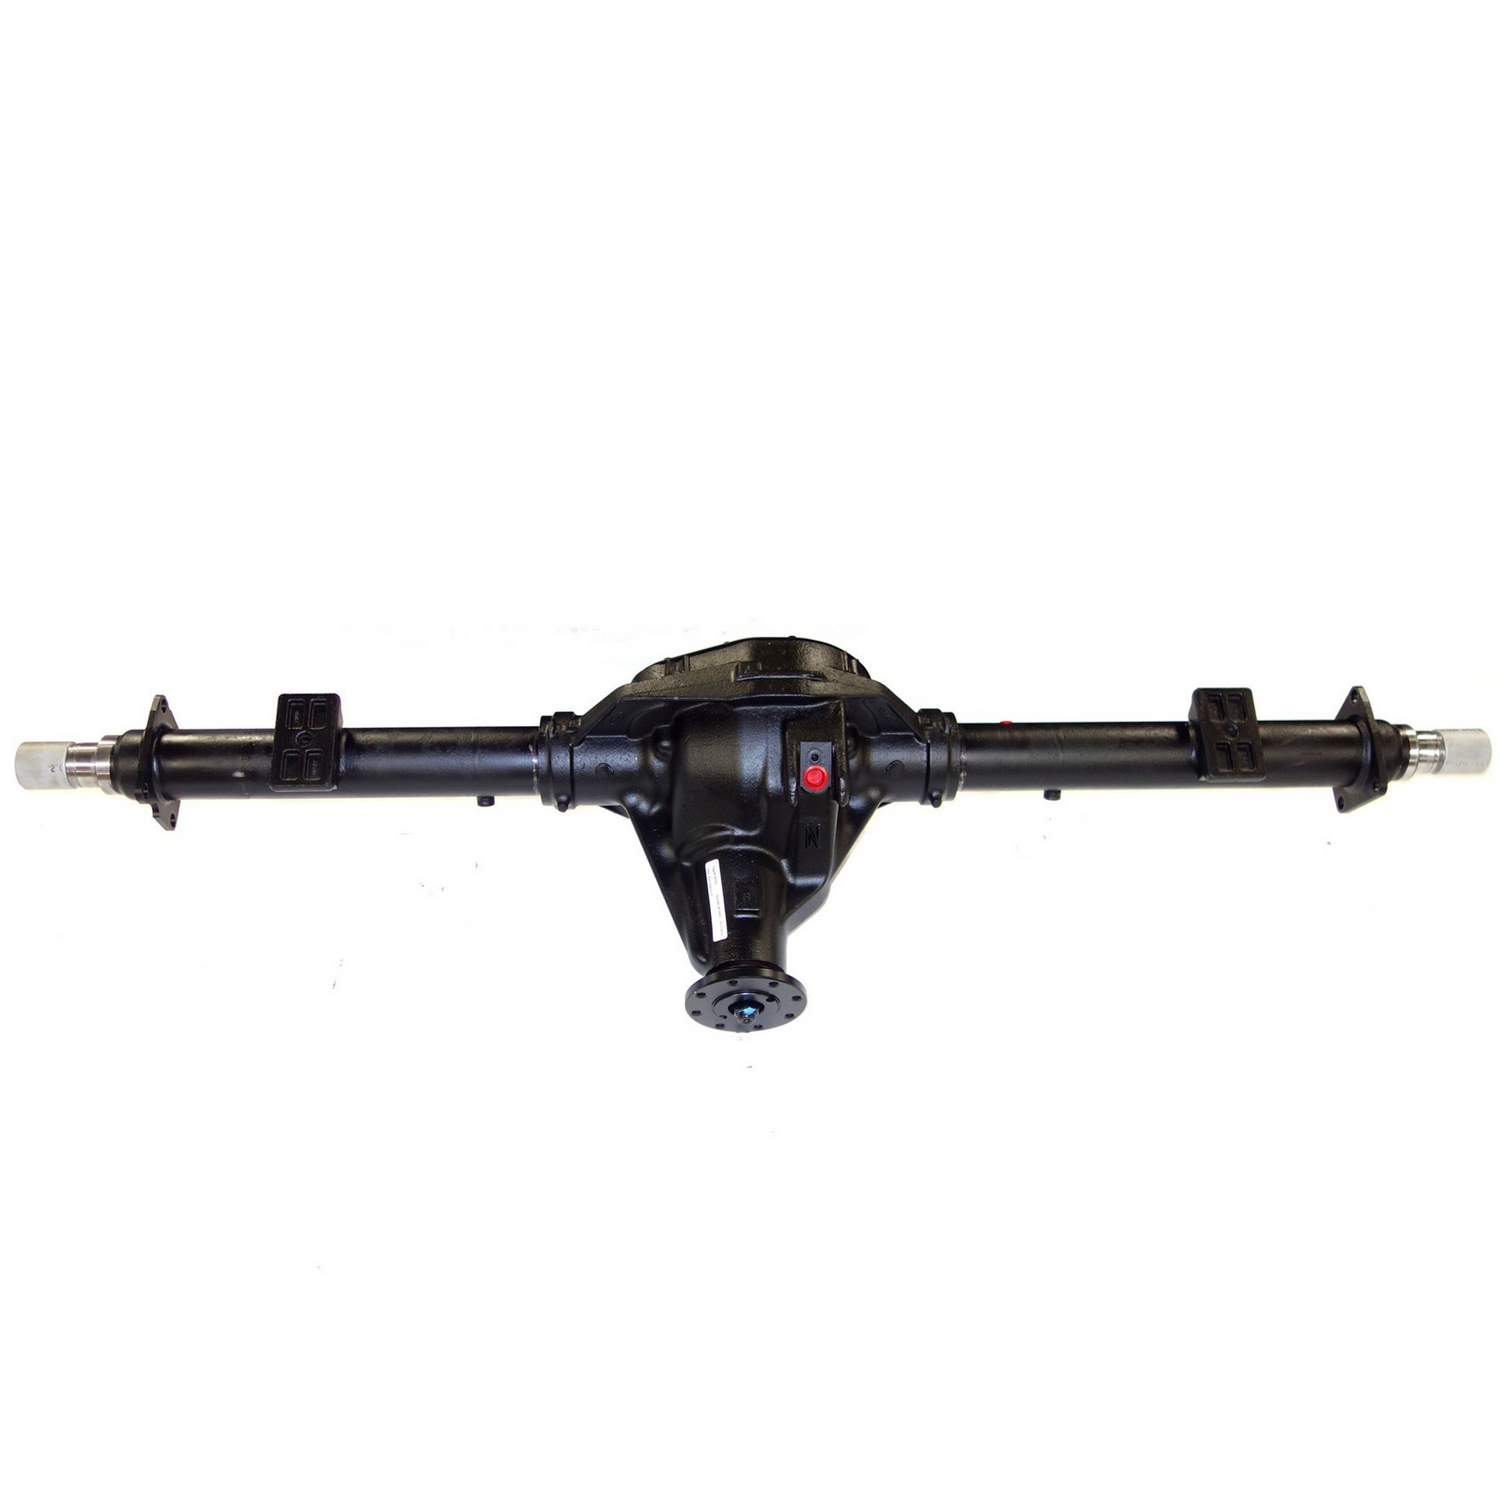 Remanufactured Axle Assy for 10.5" 1999 F250 & F350 3.73 , SRW, Posi LSD *Check Tag*